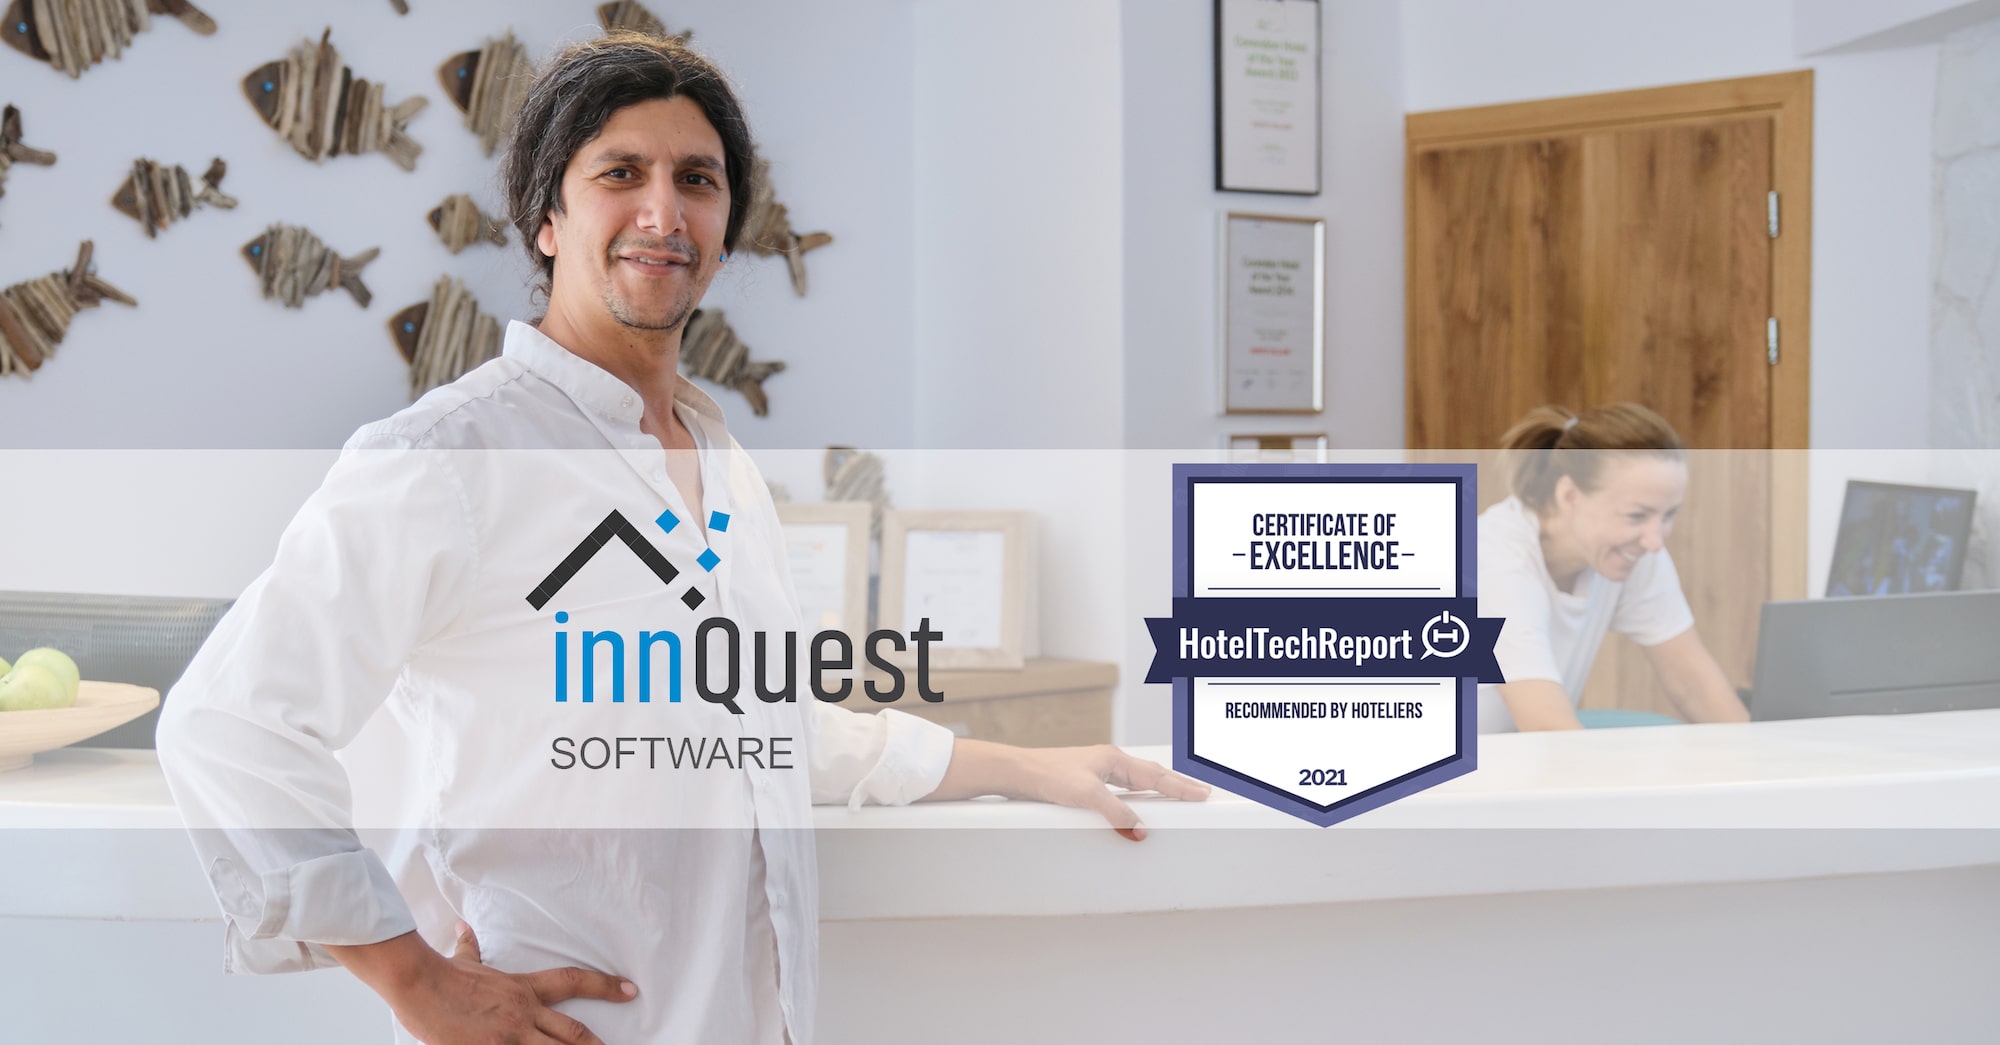 InnQuest Software earns Certification of Excellence from Hotel Tech Report